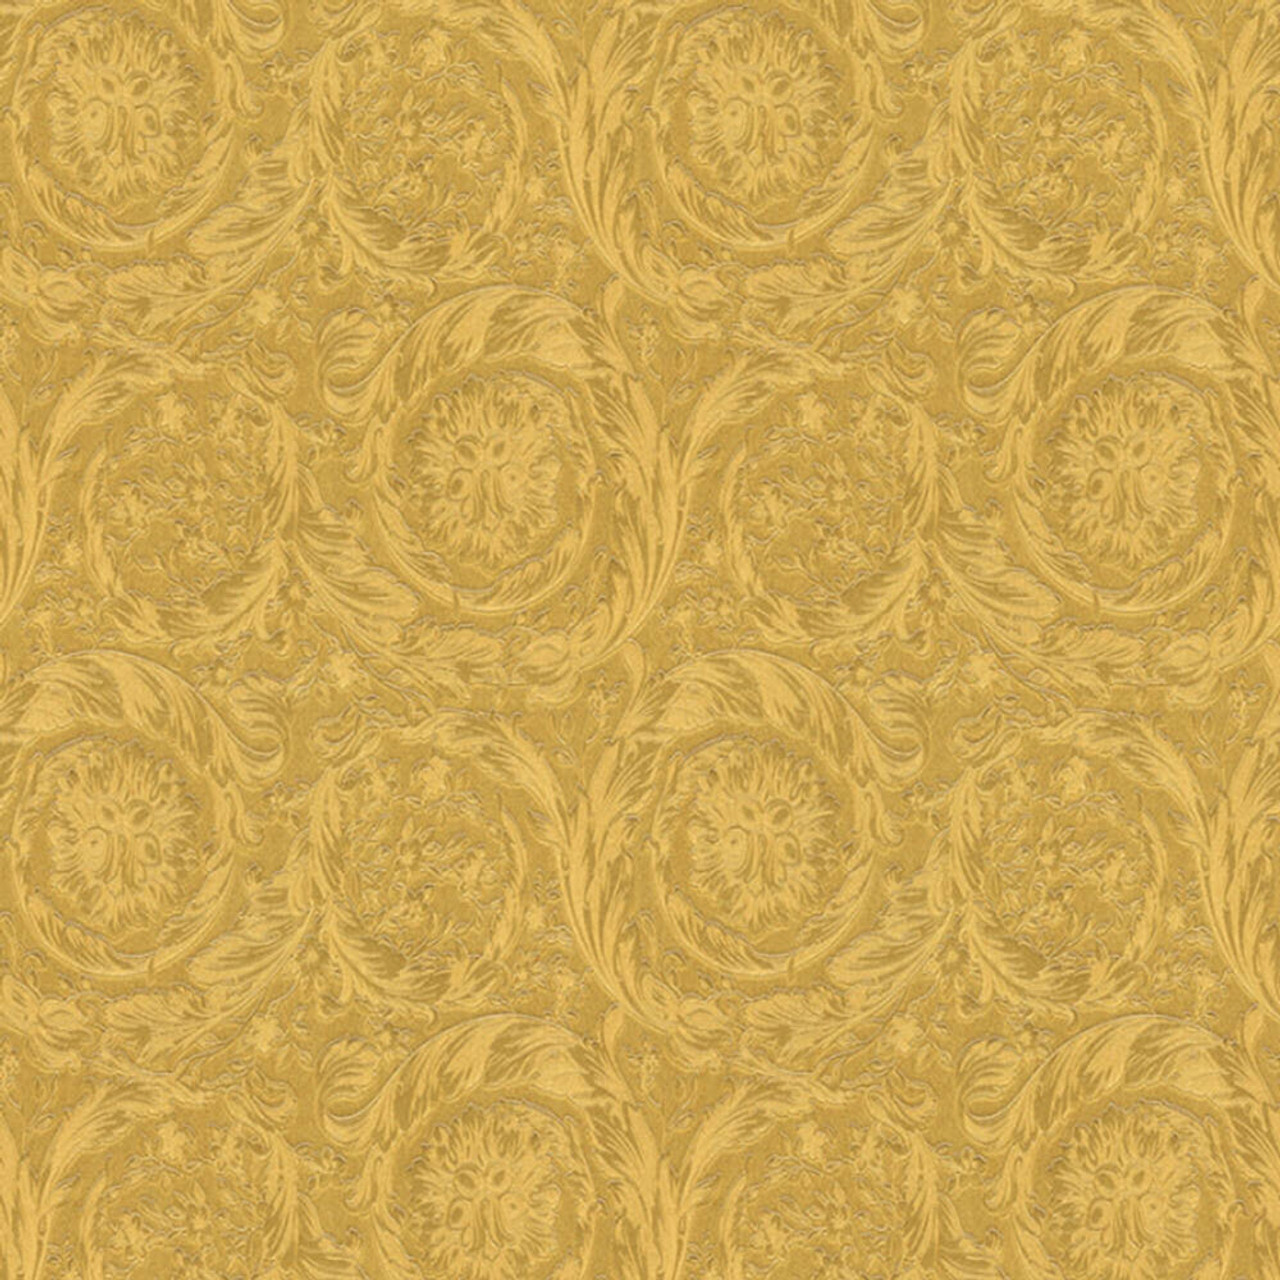 36692-3 ( 366923 ) Versace 4 Wallpaper By A S Creation